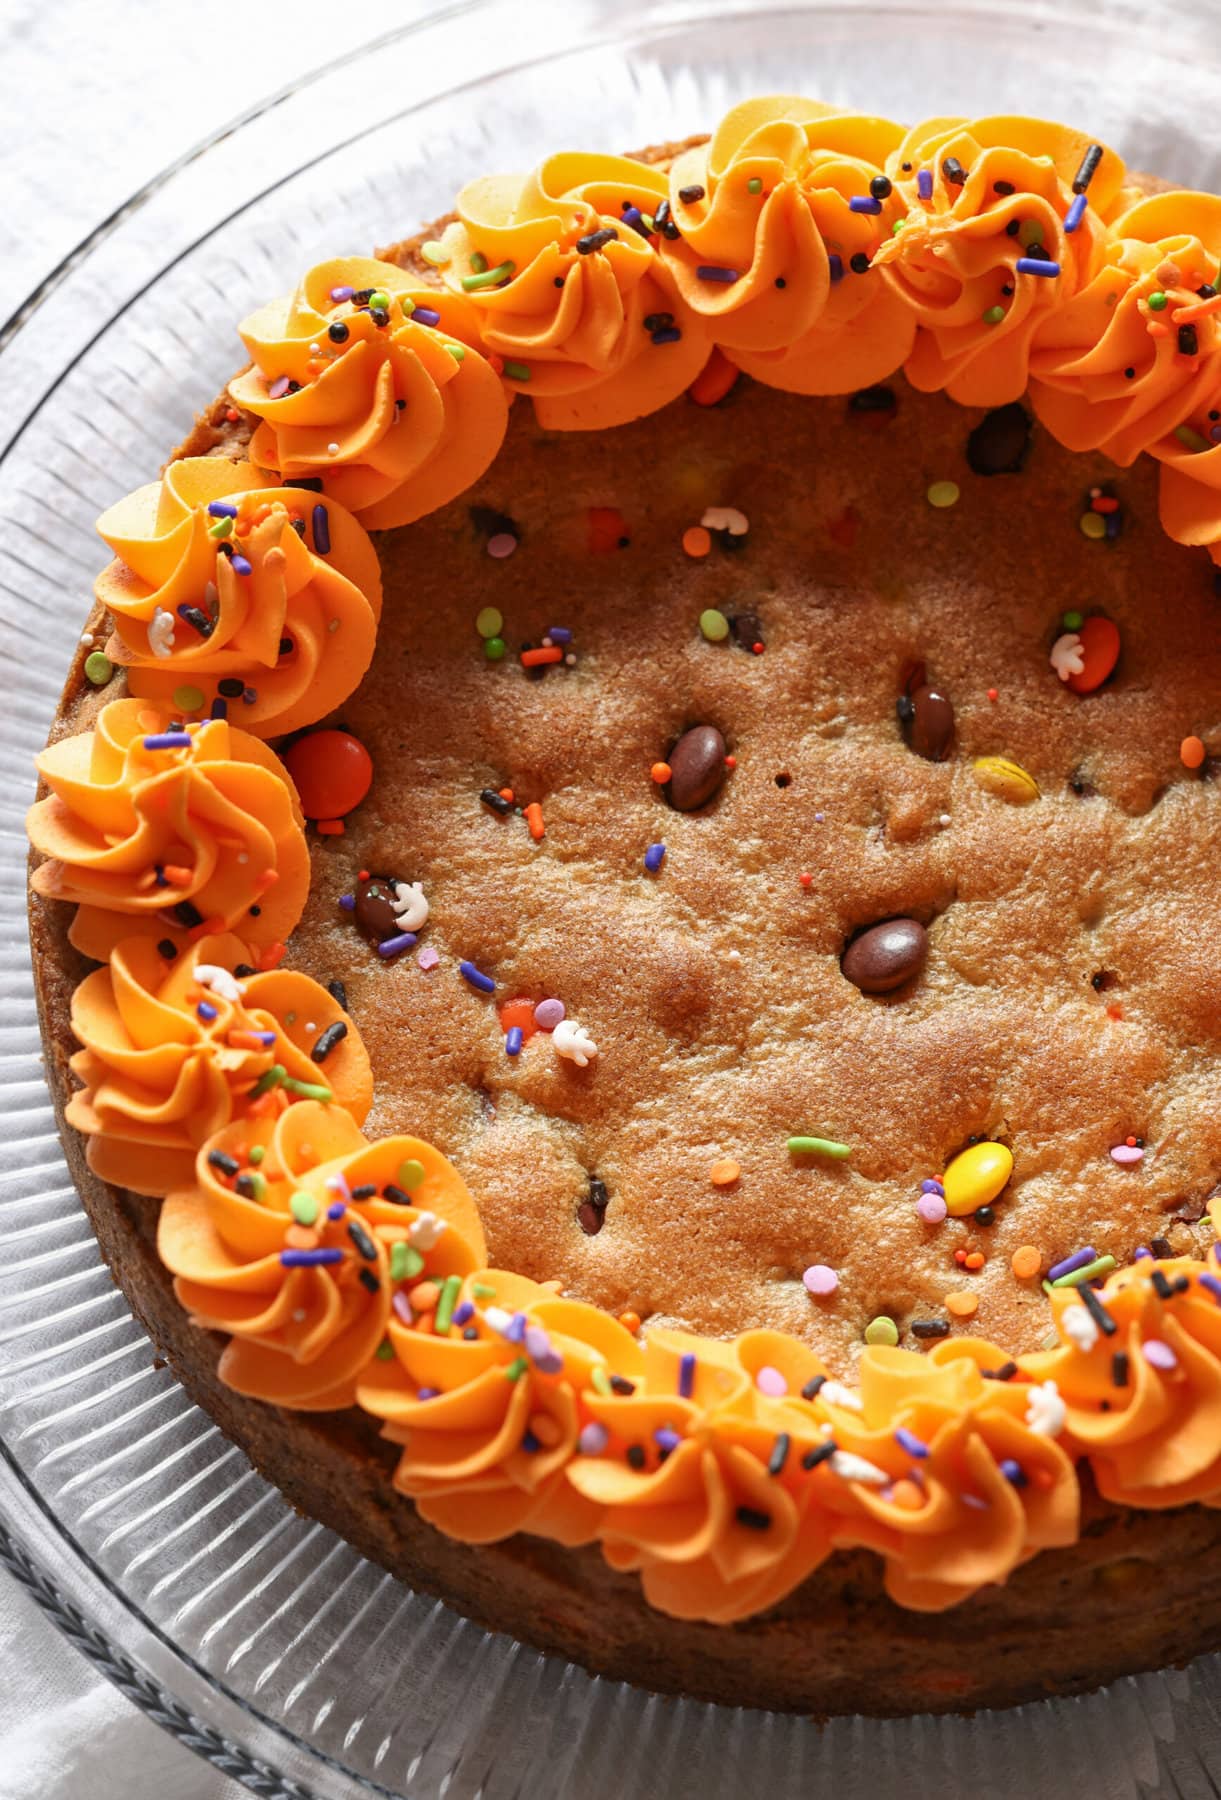 Fluffy orange buttercream frosting swirled around the edge of a cookie cake